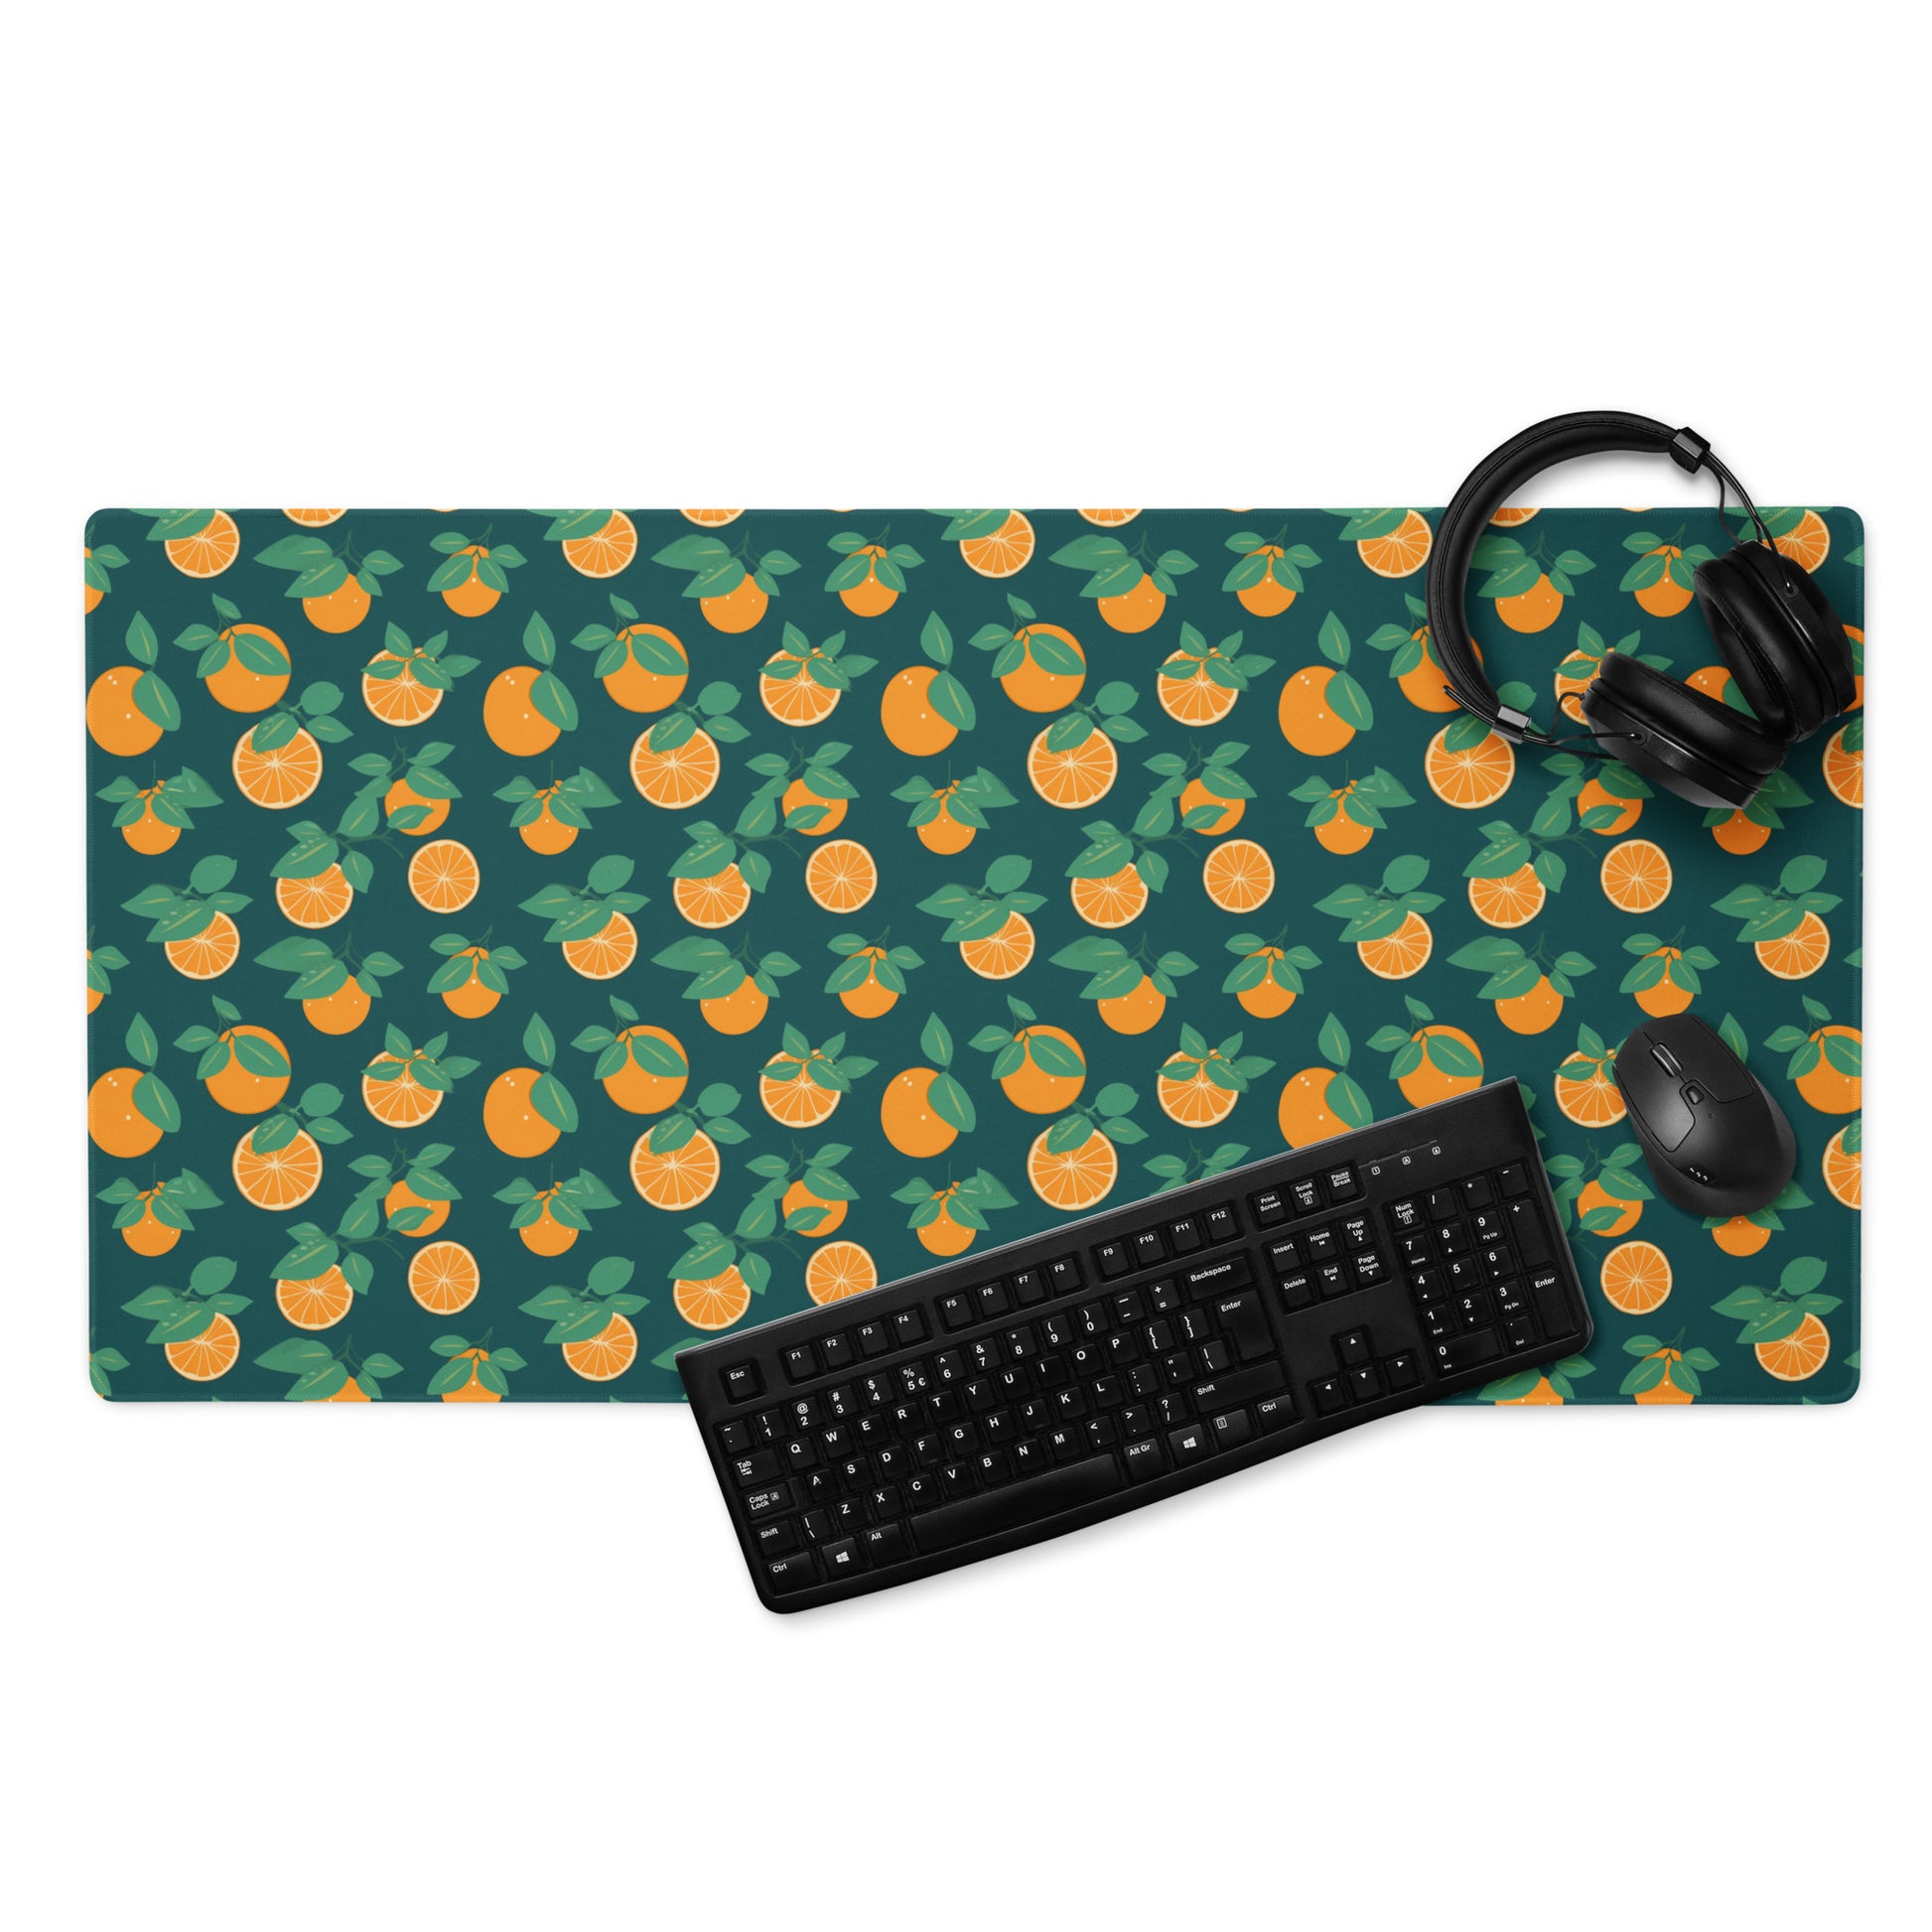 A 36" x 18" desk pad with oranges all over it displayed with a keyboard, headphones and a mouse. Orange and Blue in color.